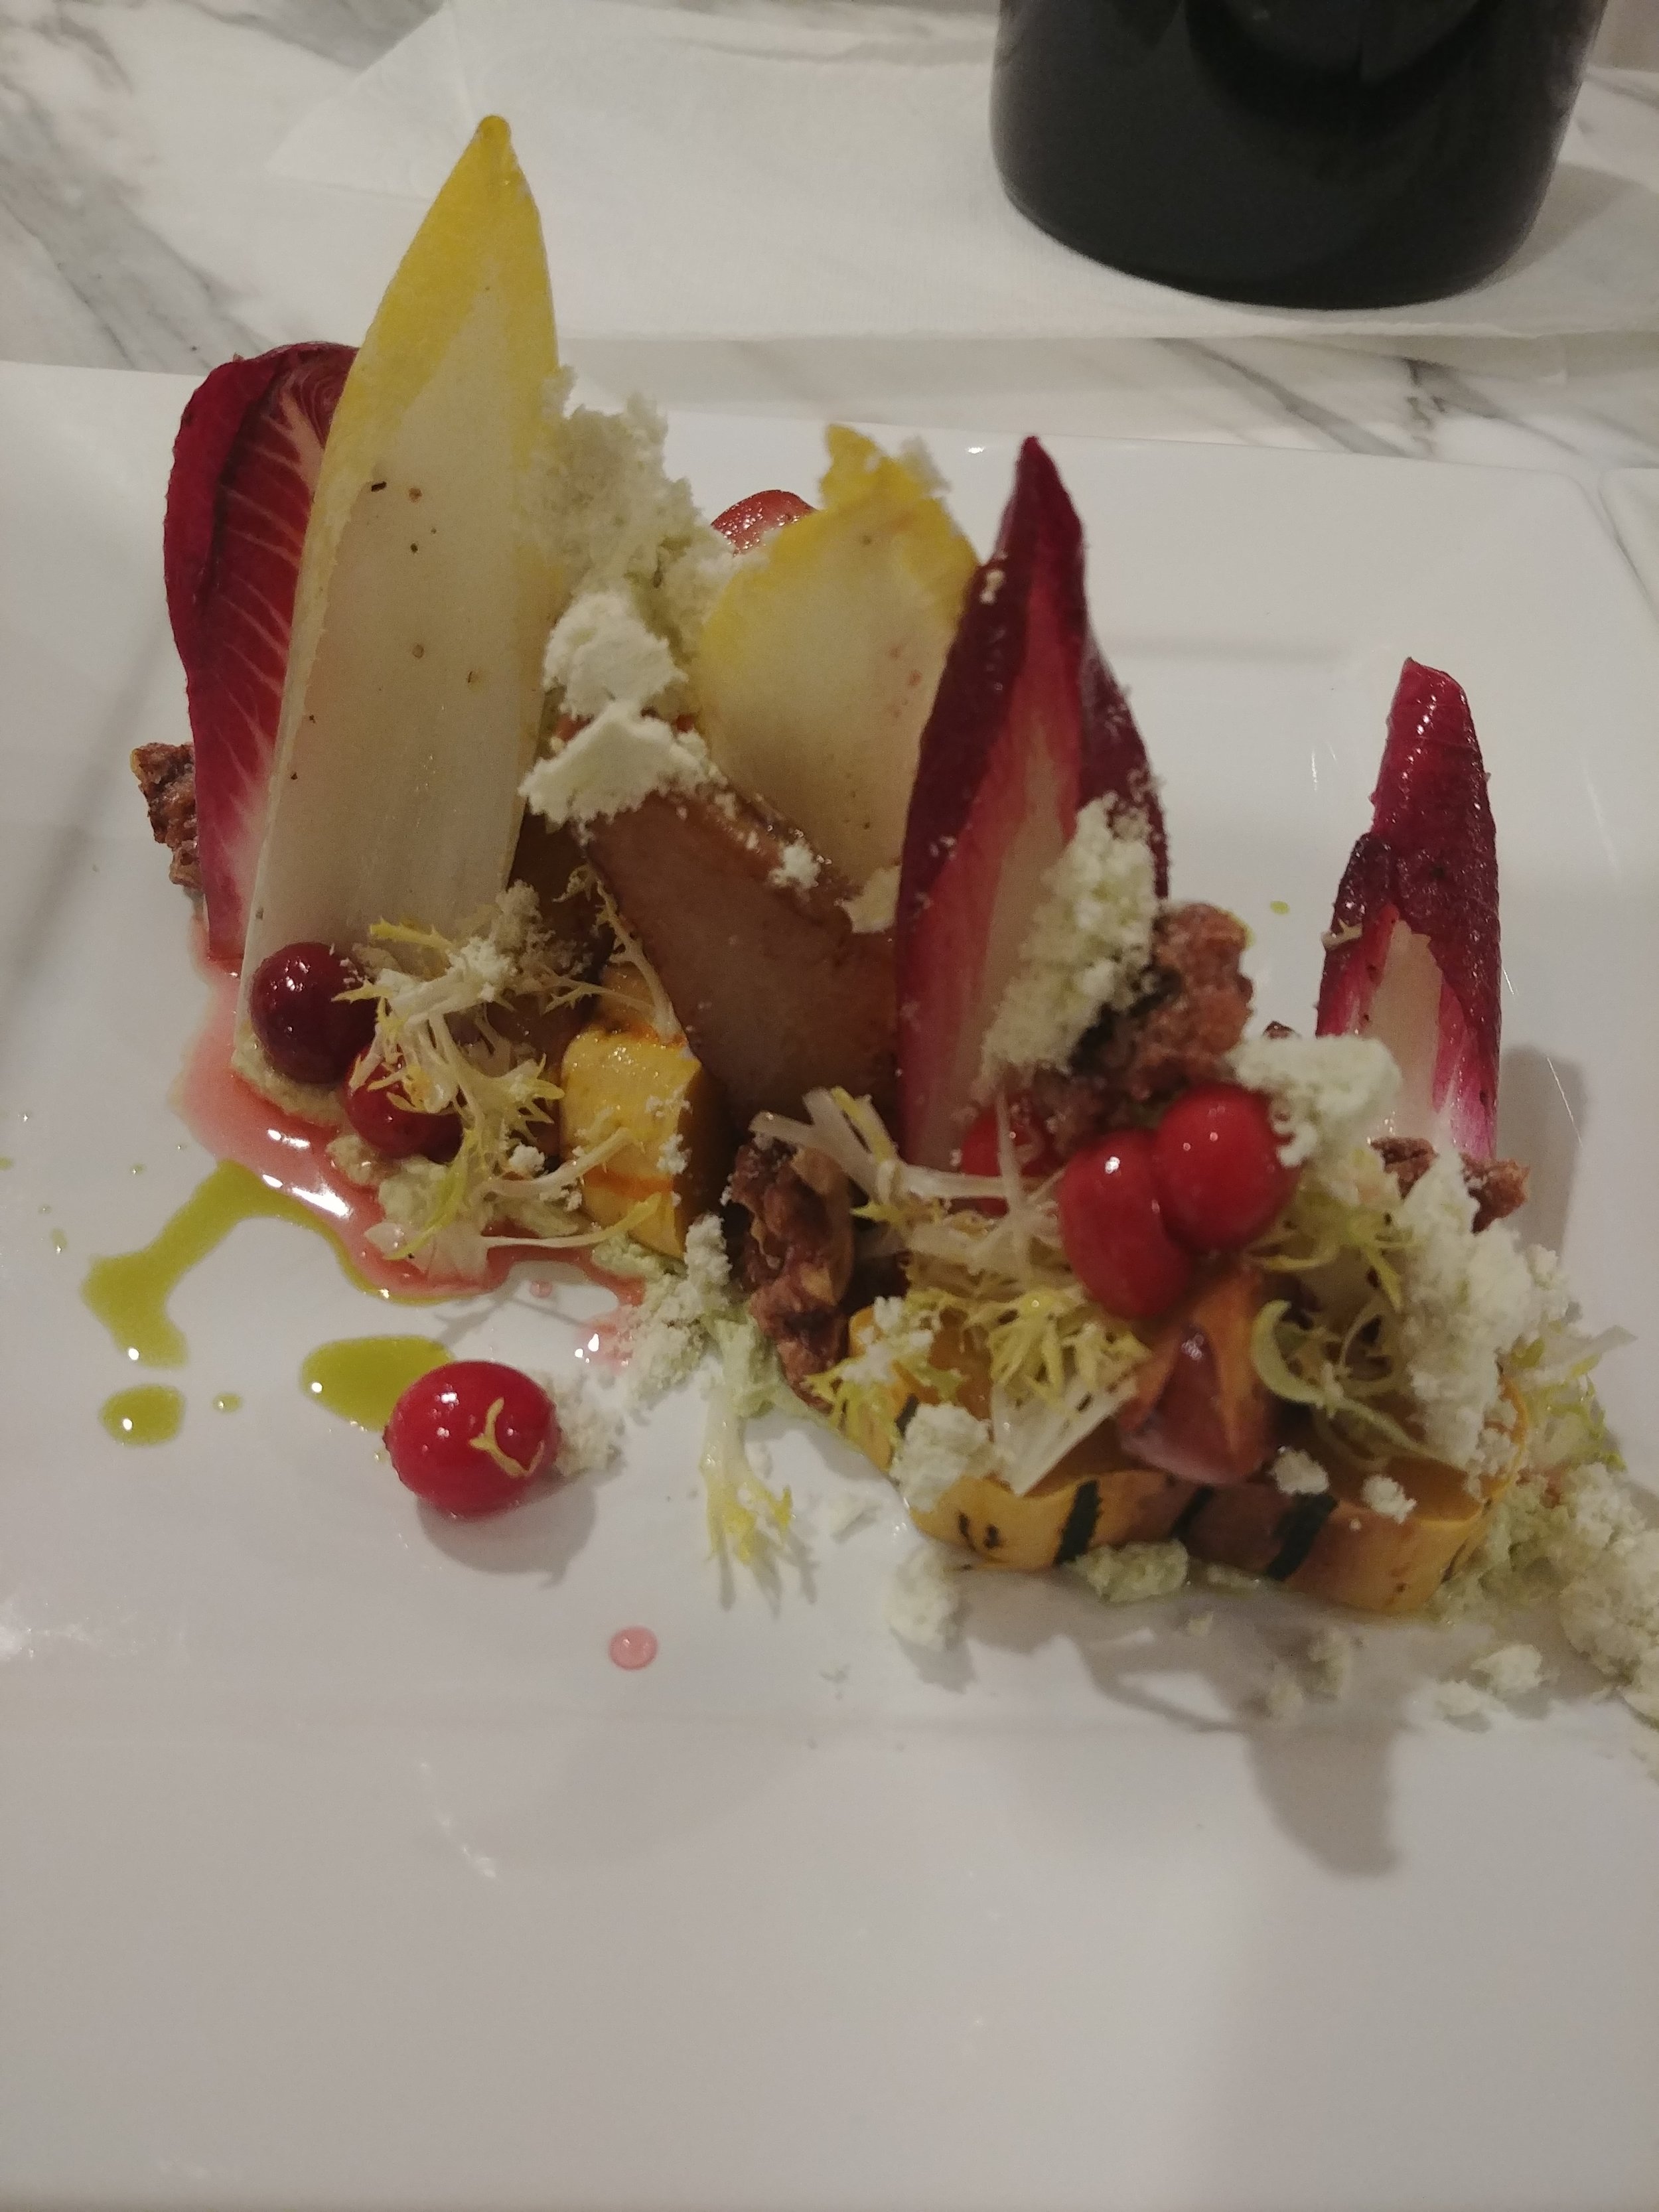  DELECATA SQUASH &amp; TOASTED PEAR SALAD Sage Infused - Whipped Local Chevre, Frisee, Pickled Cranberries, Spiced Walnuts